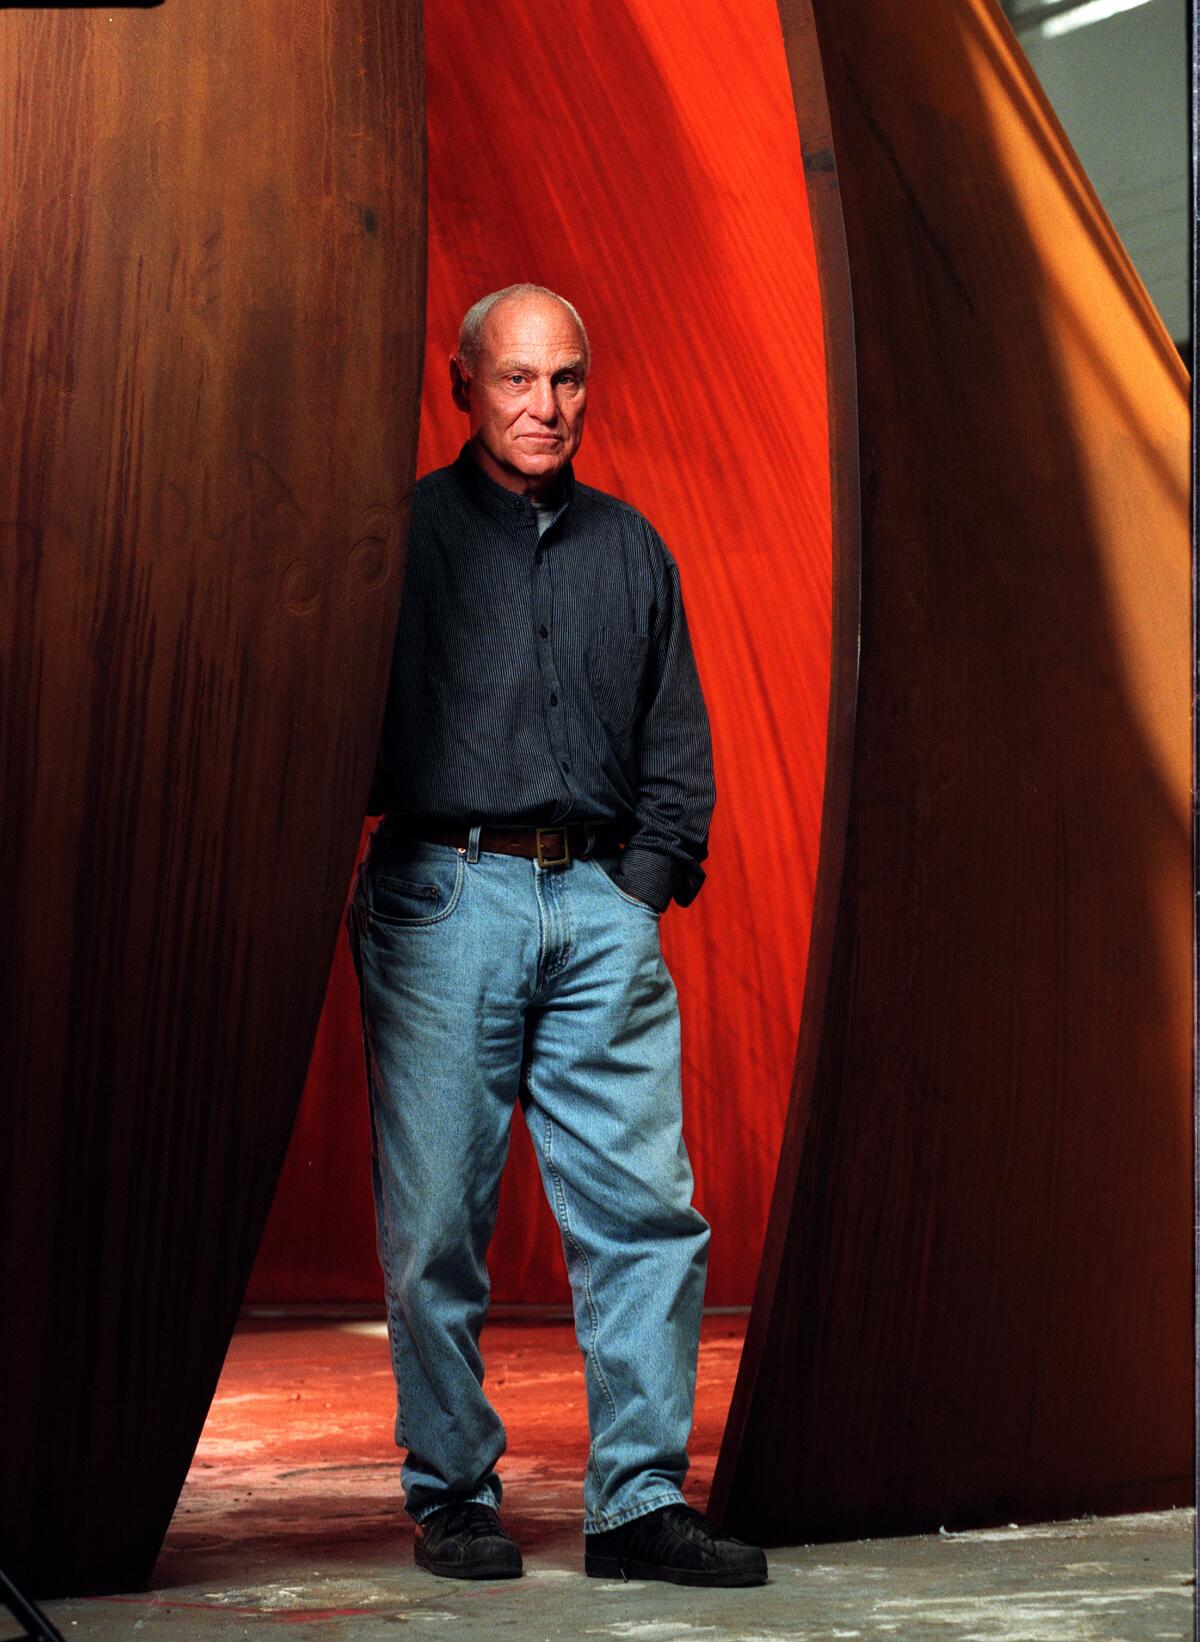 Where to find Richard Serra’s sculptures in Southern California